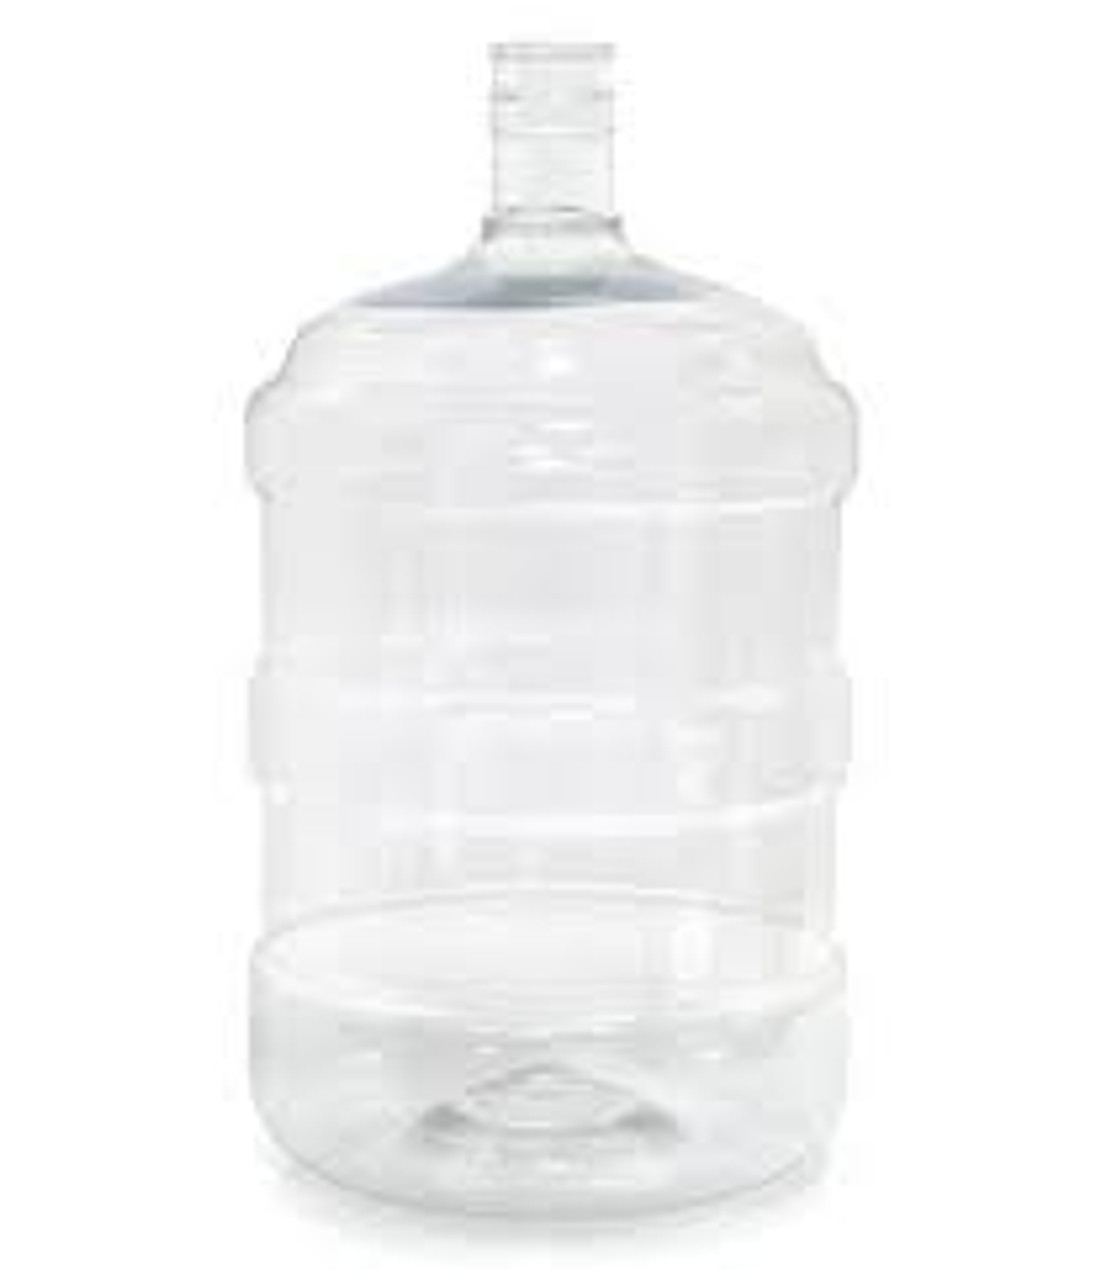 https://cdn11.bigcommerce.com/s-hb88tx65hv/images/stencil/1280x1280/products/150/415/6-gallon-vintage-shop-plastic-carboy-not-drilled-for-racking-outlet-8__60185.1652473478.jpg?c=1